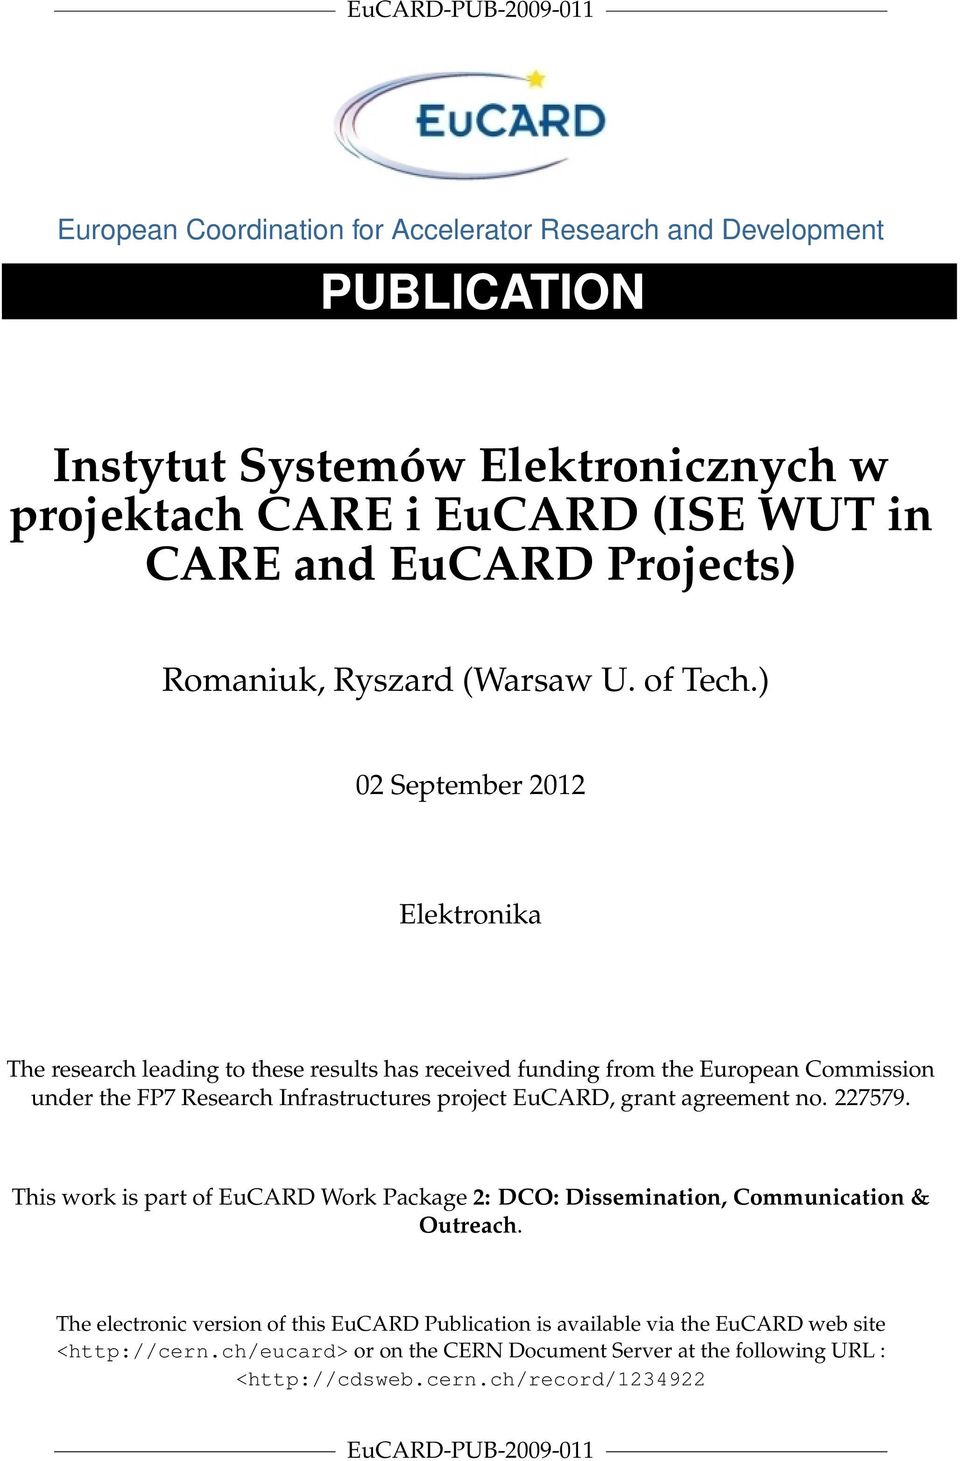 ) 02 September 2012 Elektronika The research leading to these results has received funding from the European Commission under the FP7 Research Infrastructures project EuCARD, grant